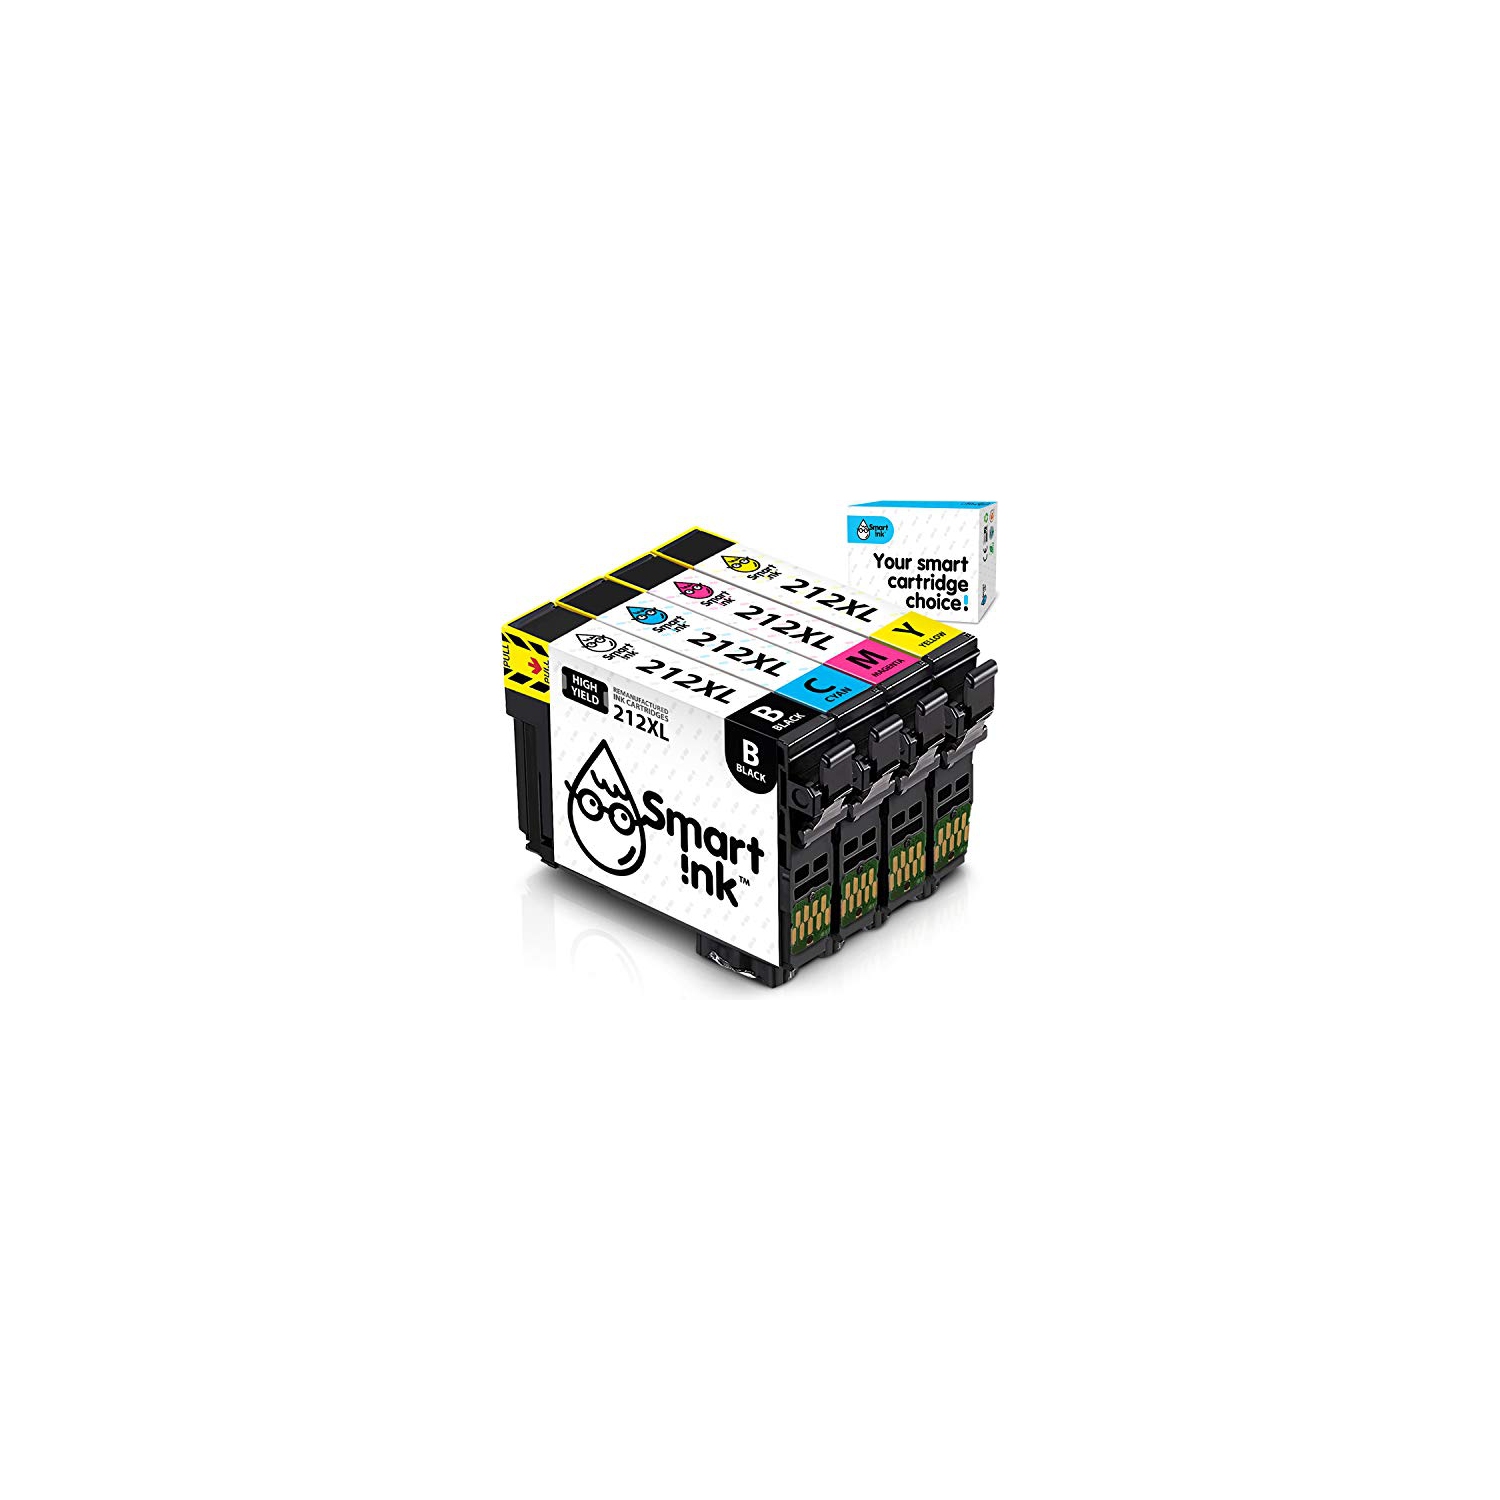 Smart Ink Remanufactured Ink Cartridge Replacement for Epson T212 212XL 212 XL (BK/C/M/Y 4 Combo Pack) to use with Expressi...